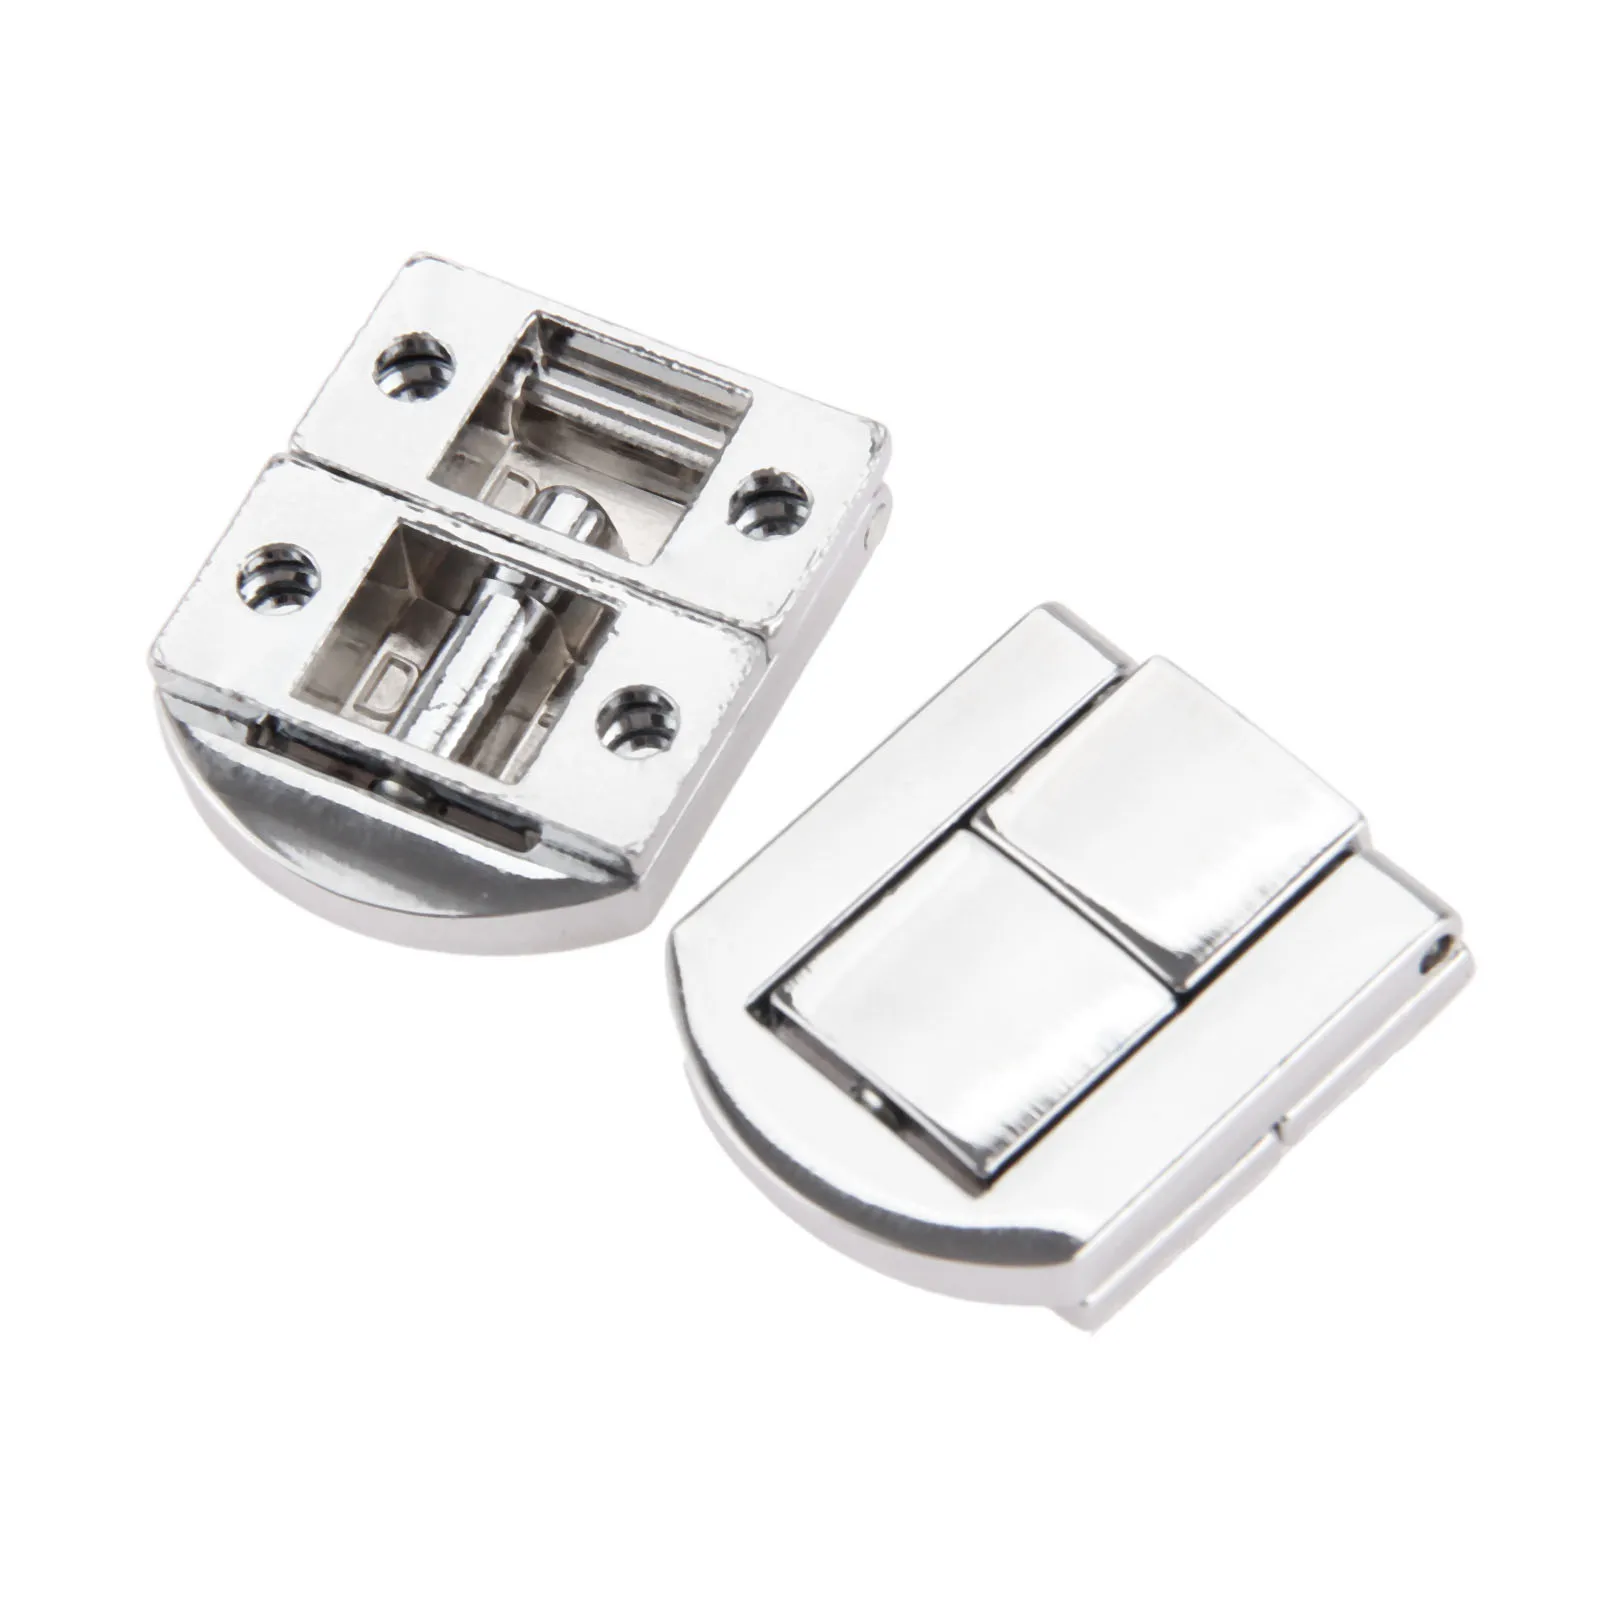 4pcs 25*30mm Vintage Square Luggage Jewelry Gift Box Clasp Buckle Latch Hasp Lock Metal Lock Catch Latches Suitcase Buckle Clasp